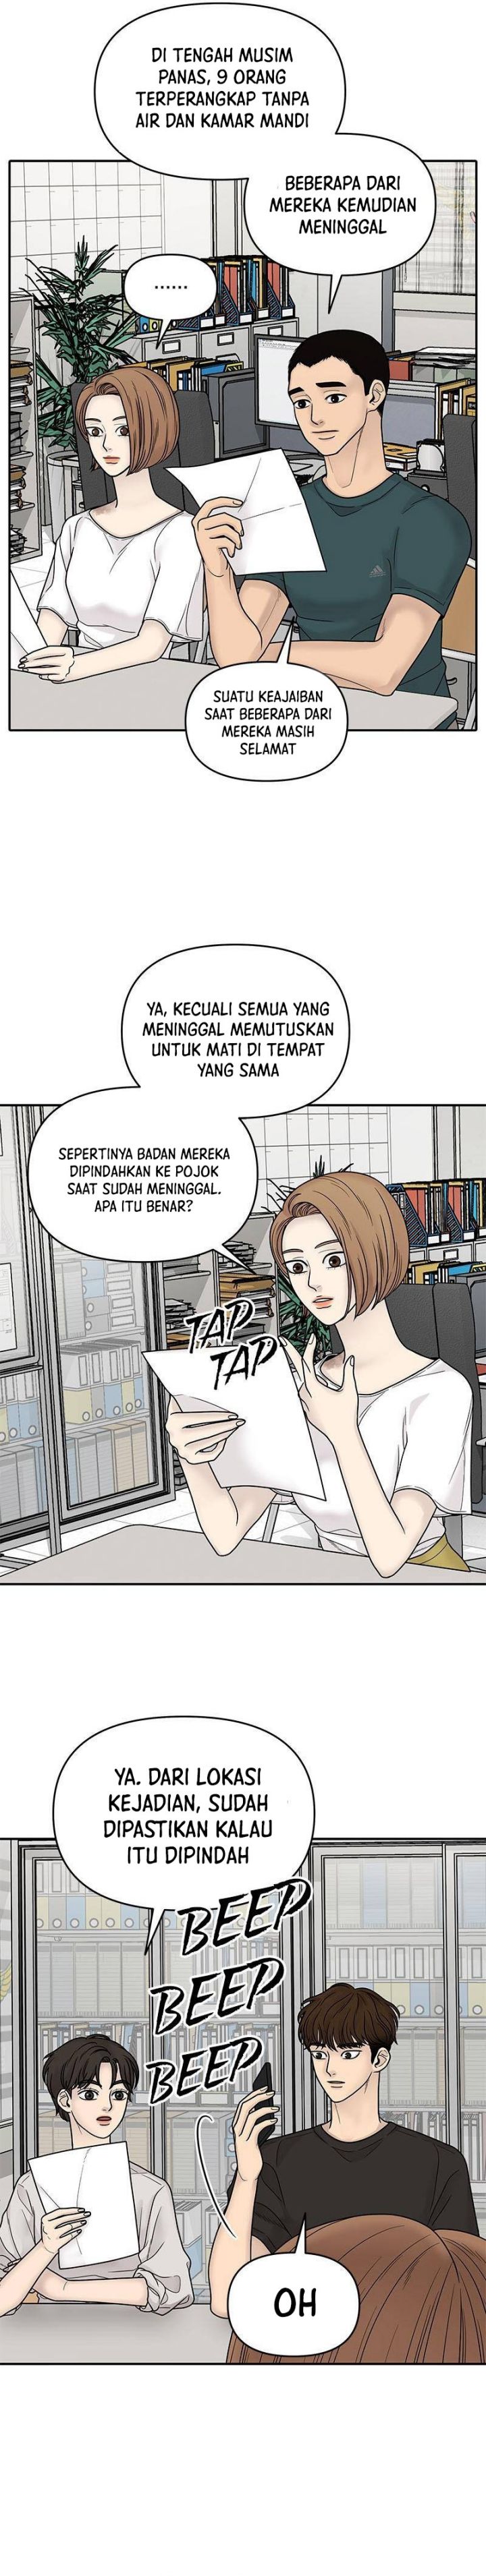 Chasing Spica Chapter 02 - 307